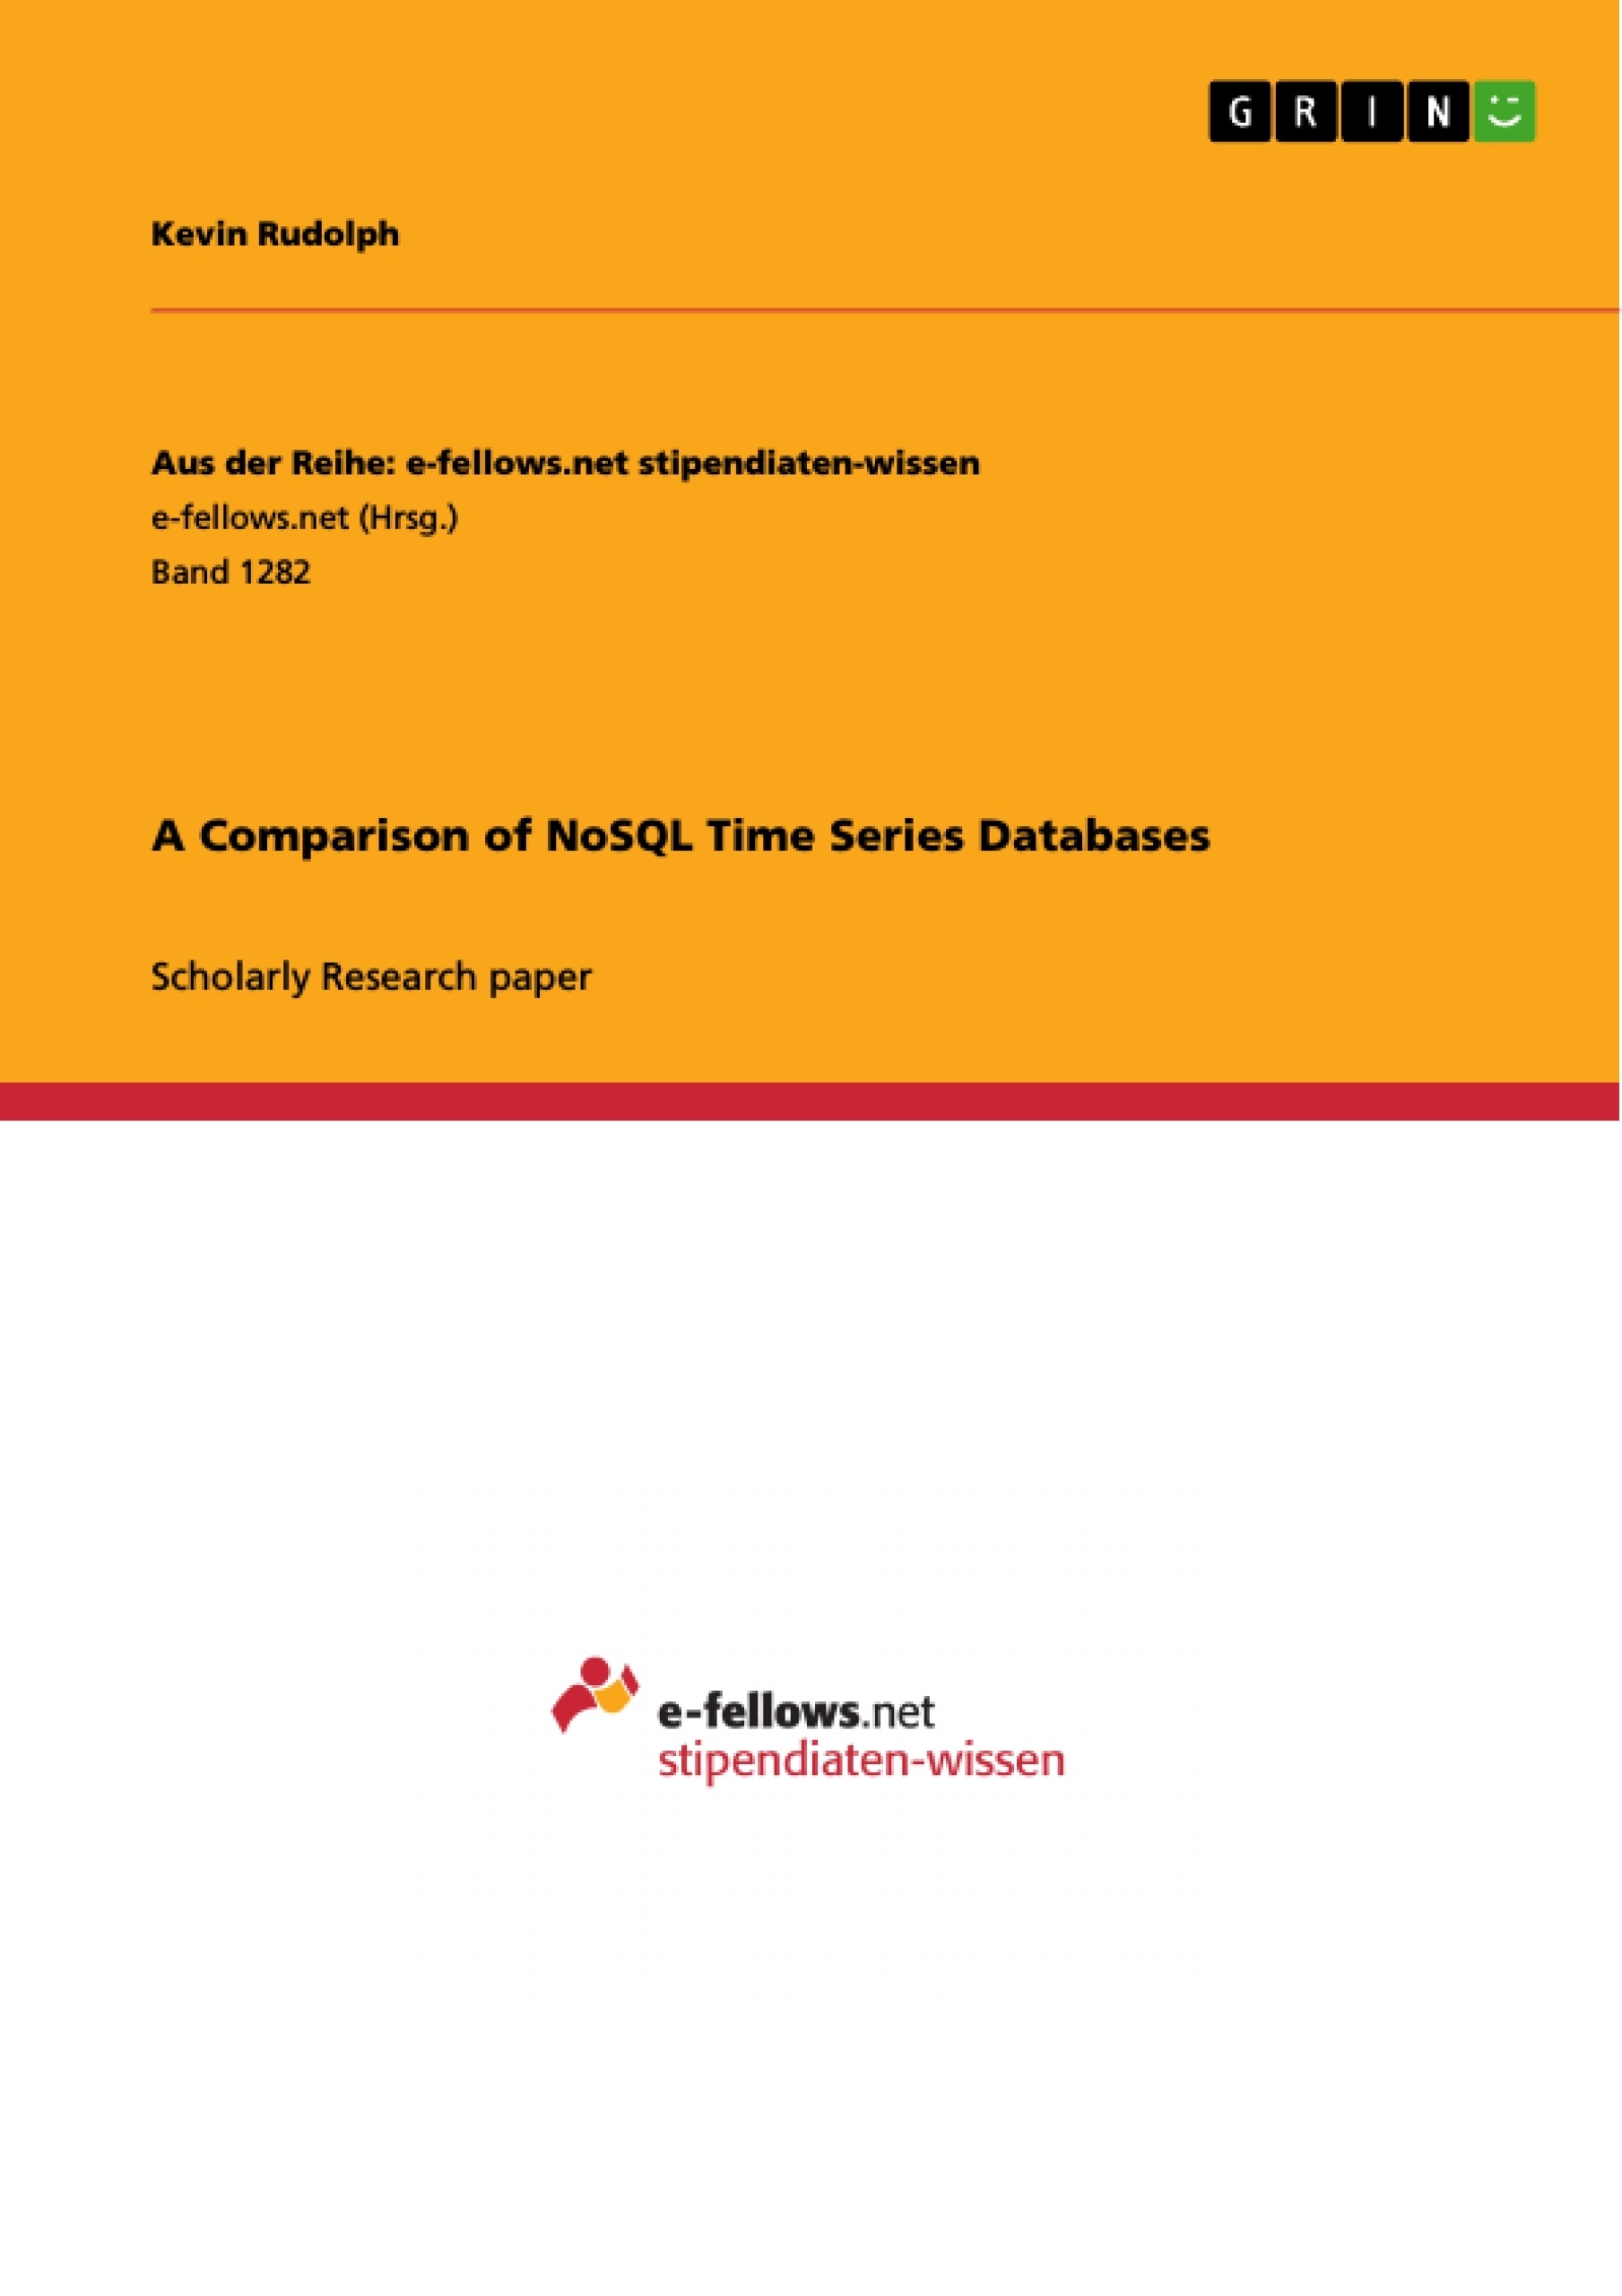 Title: A Comparison of NoSQL Time Series Databases